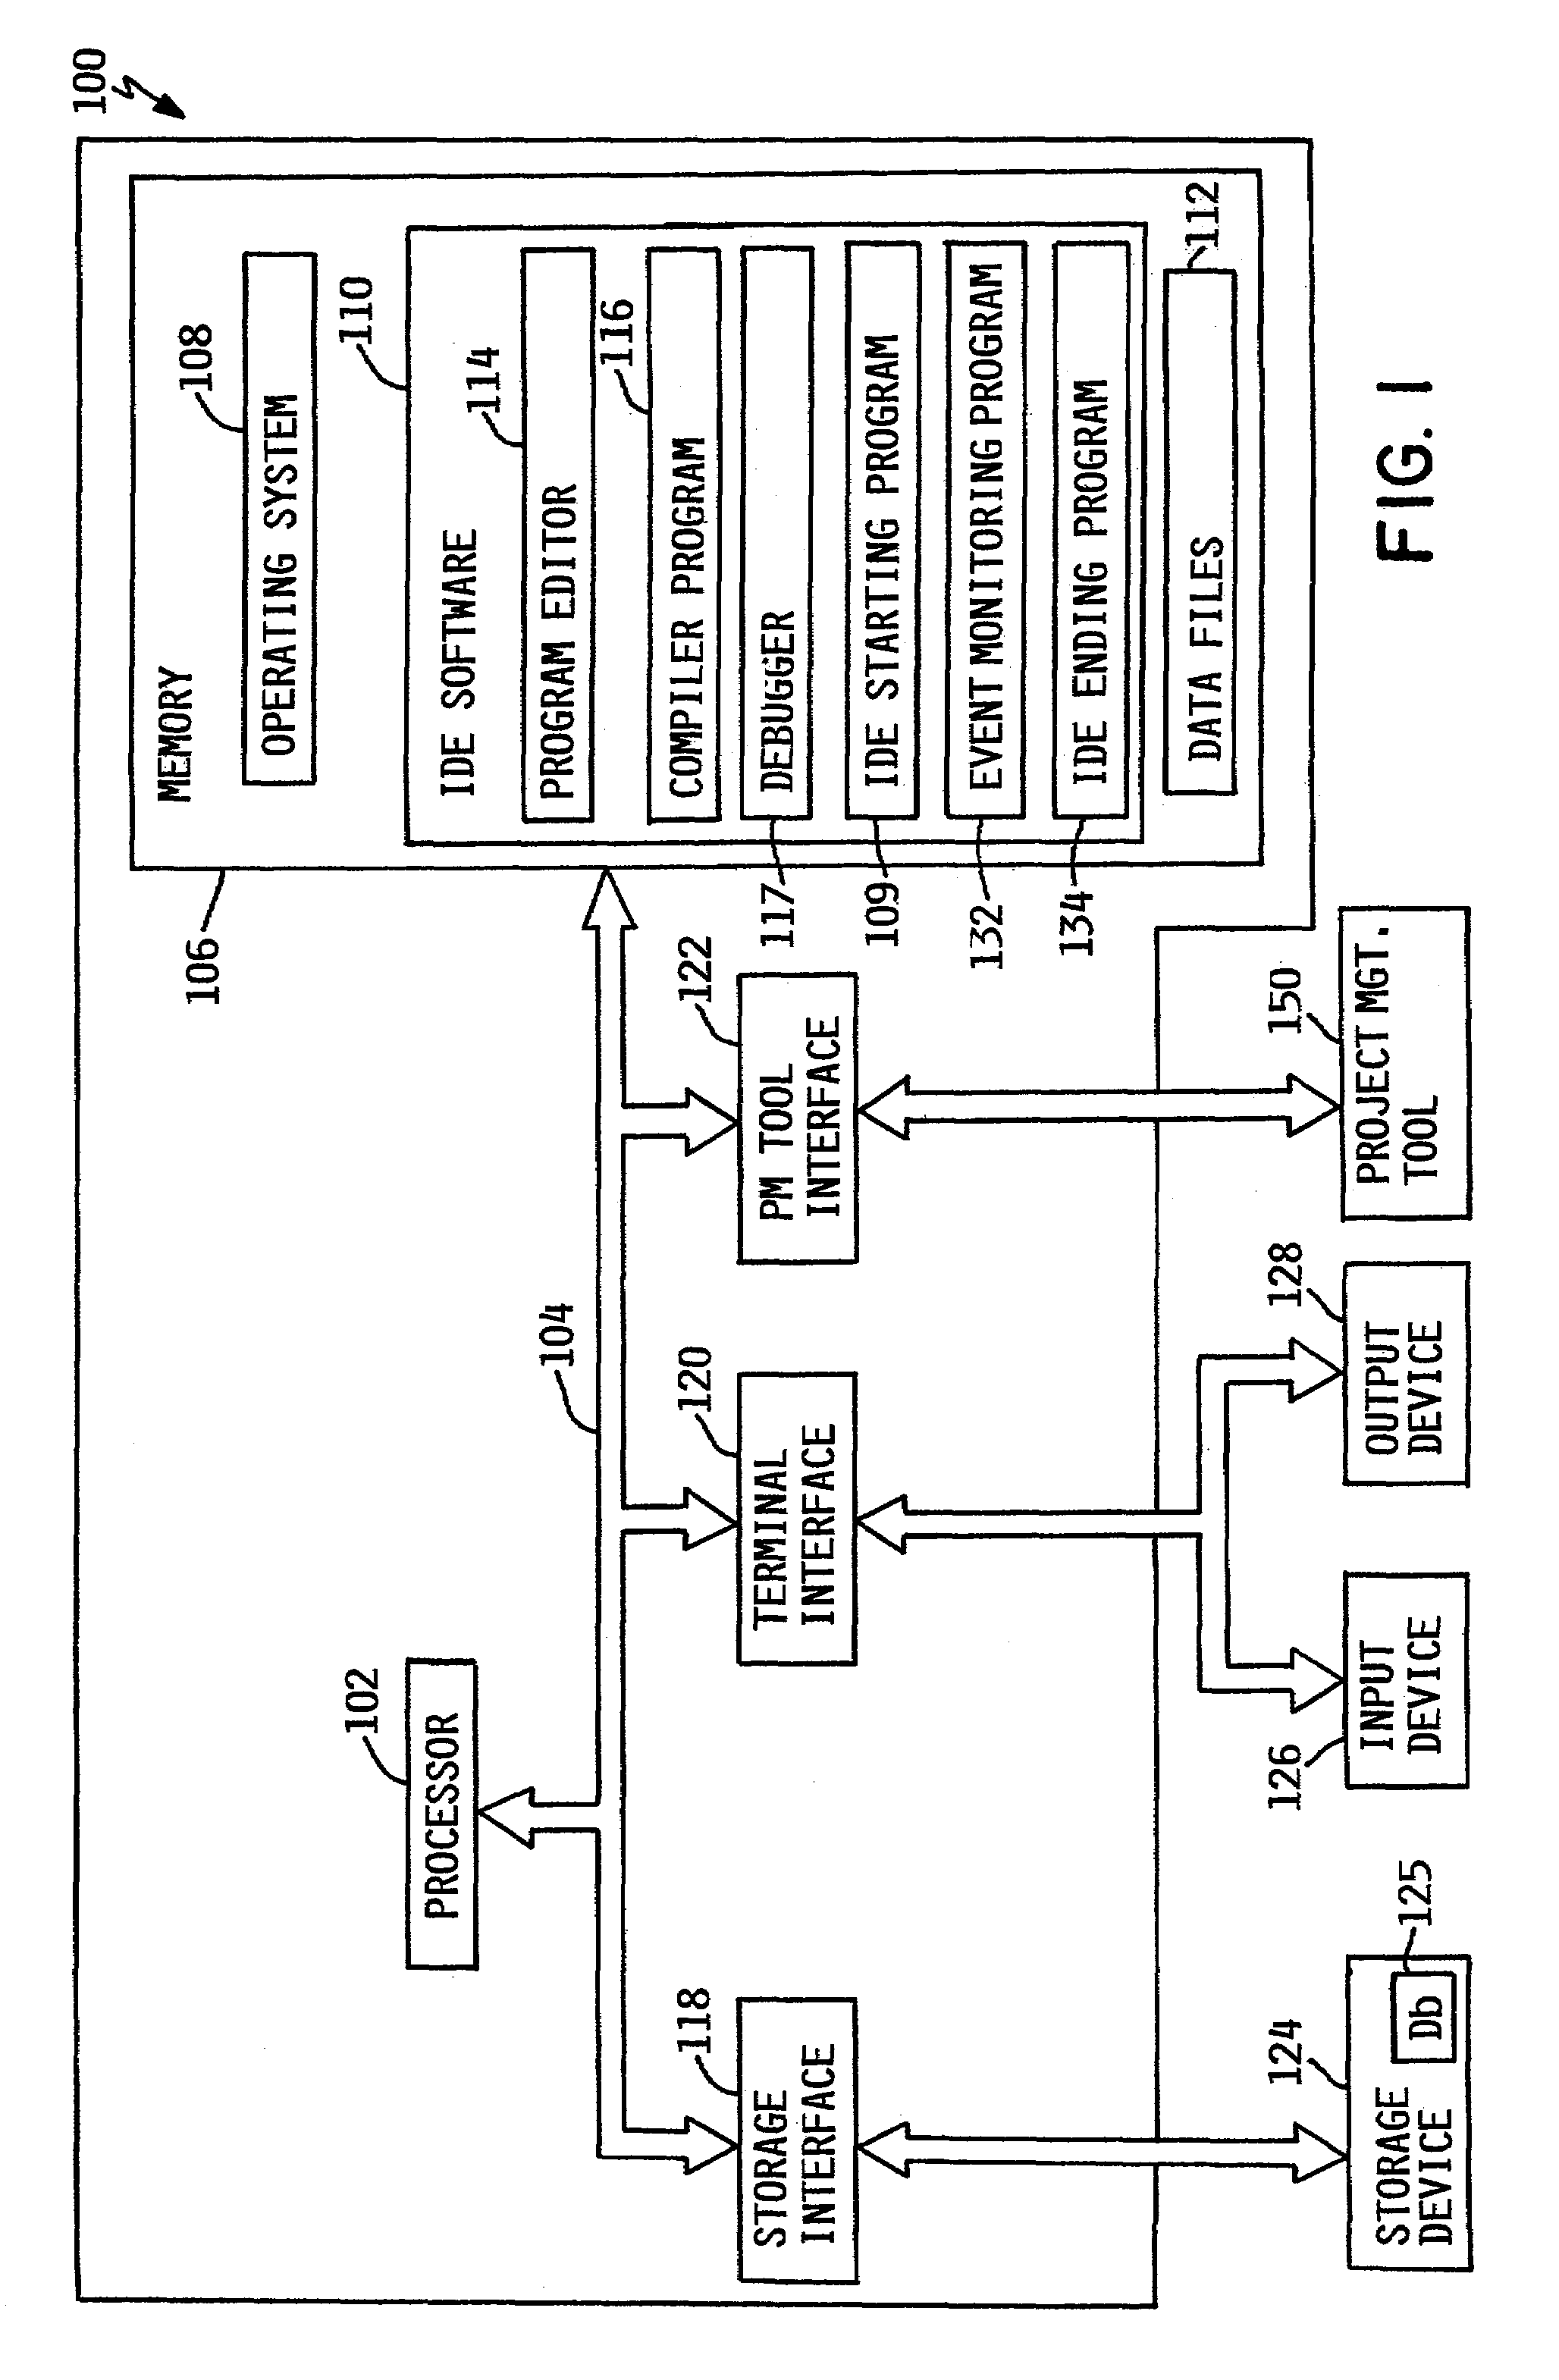 Integrated project management and development environment for determining the time expended on project tasks